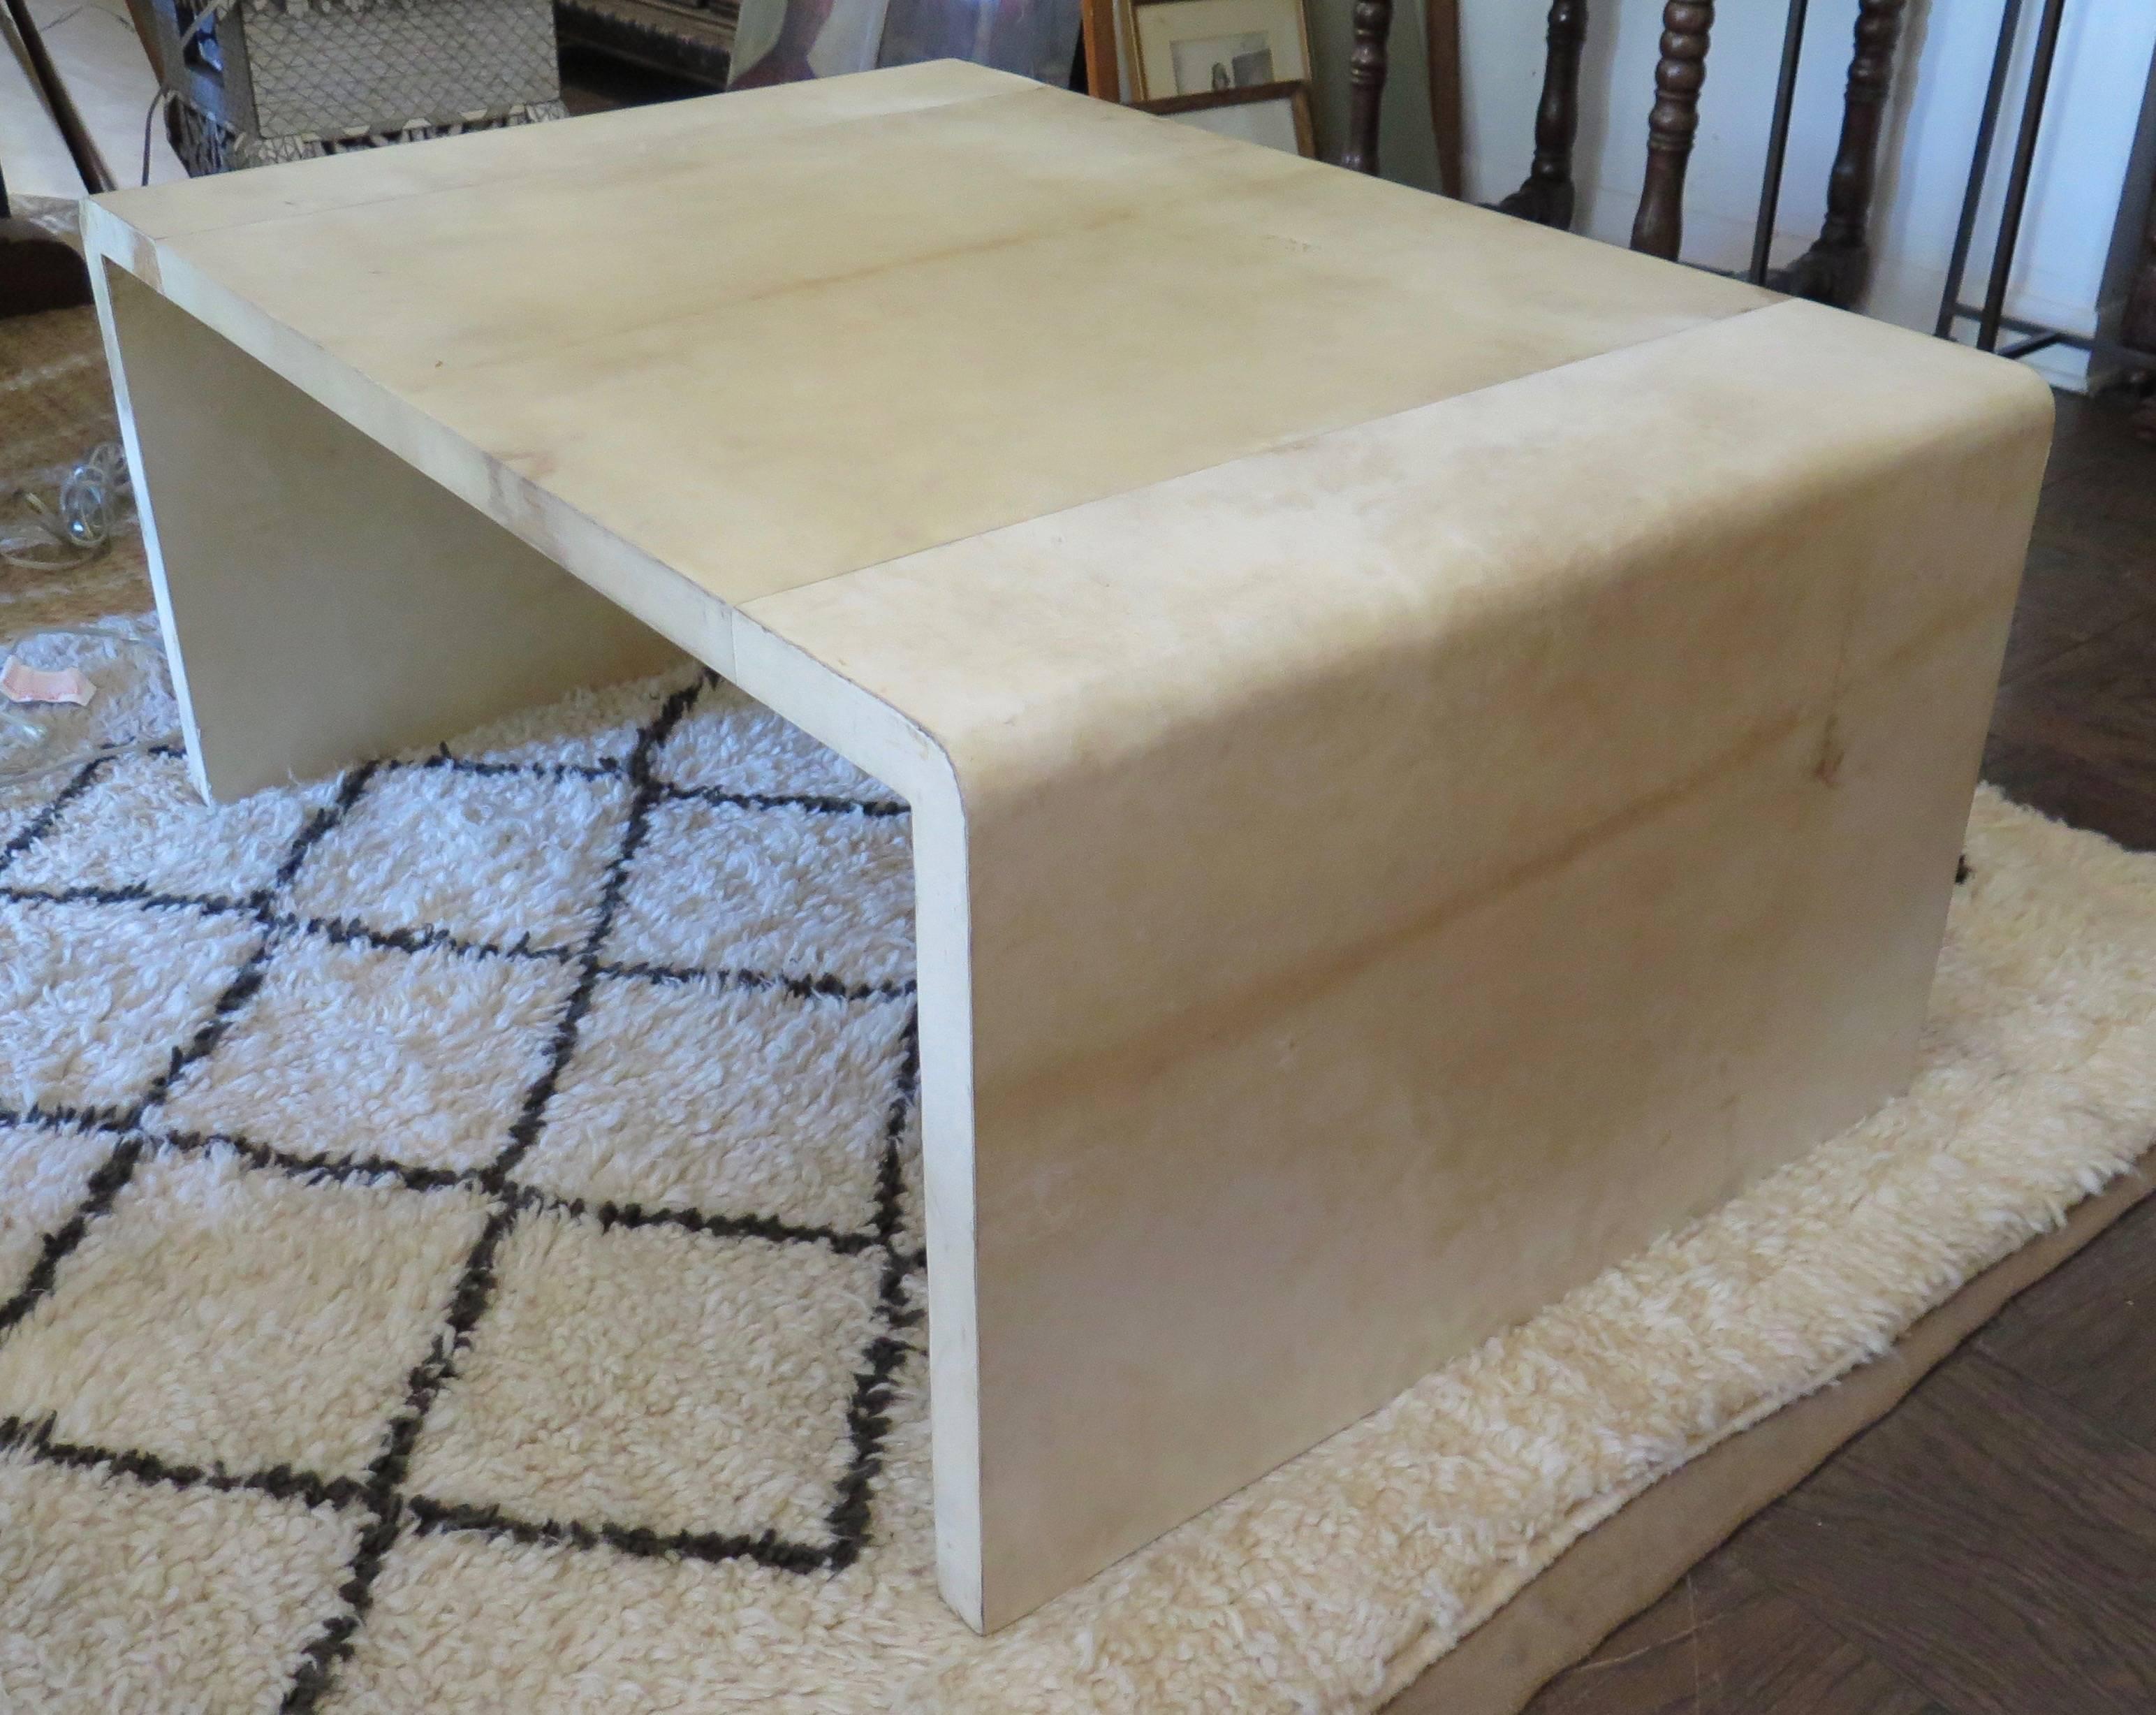 Great looking parchment coffee table in the style of Springer or Tura.